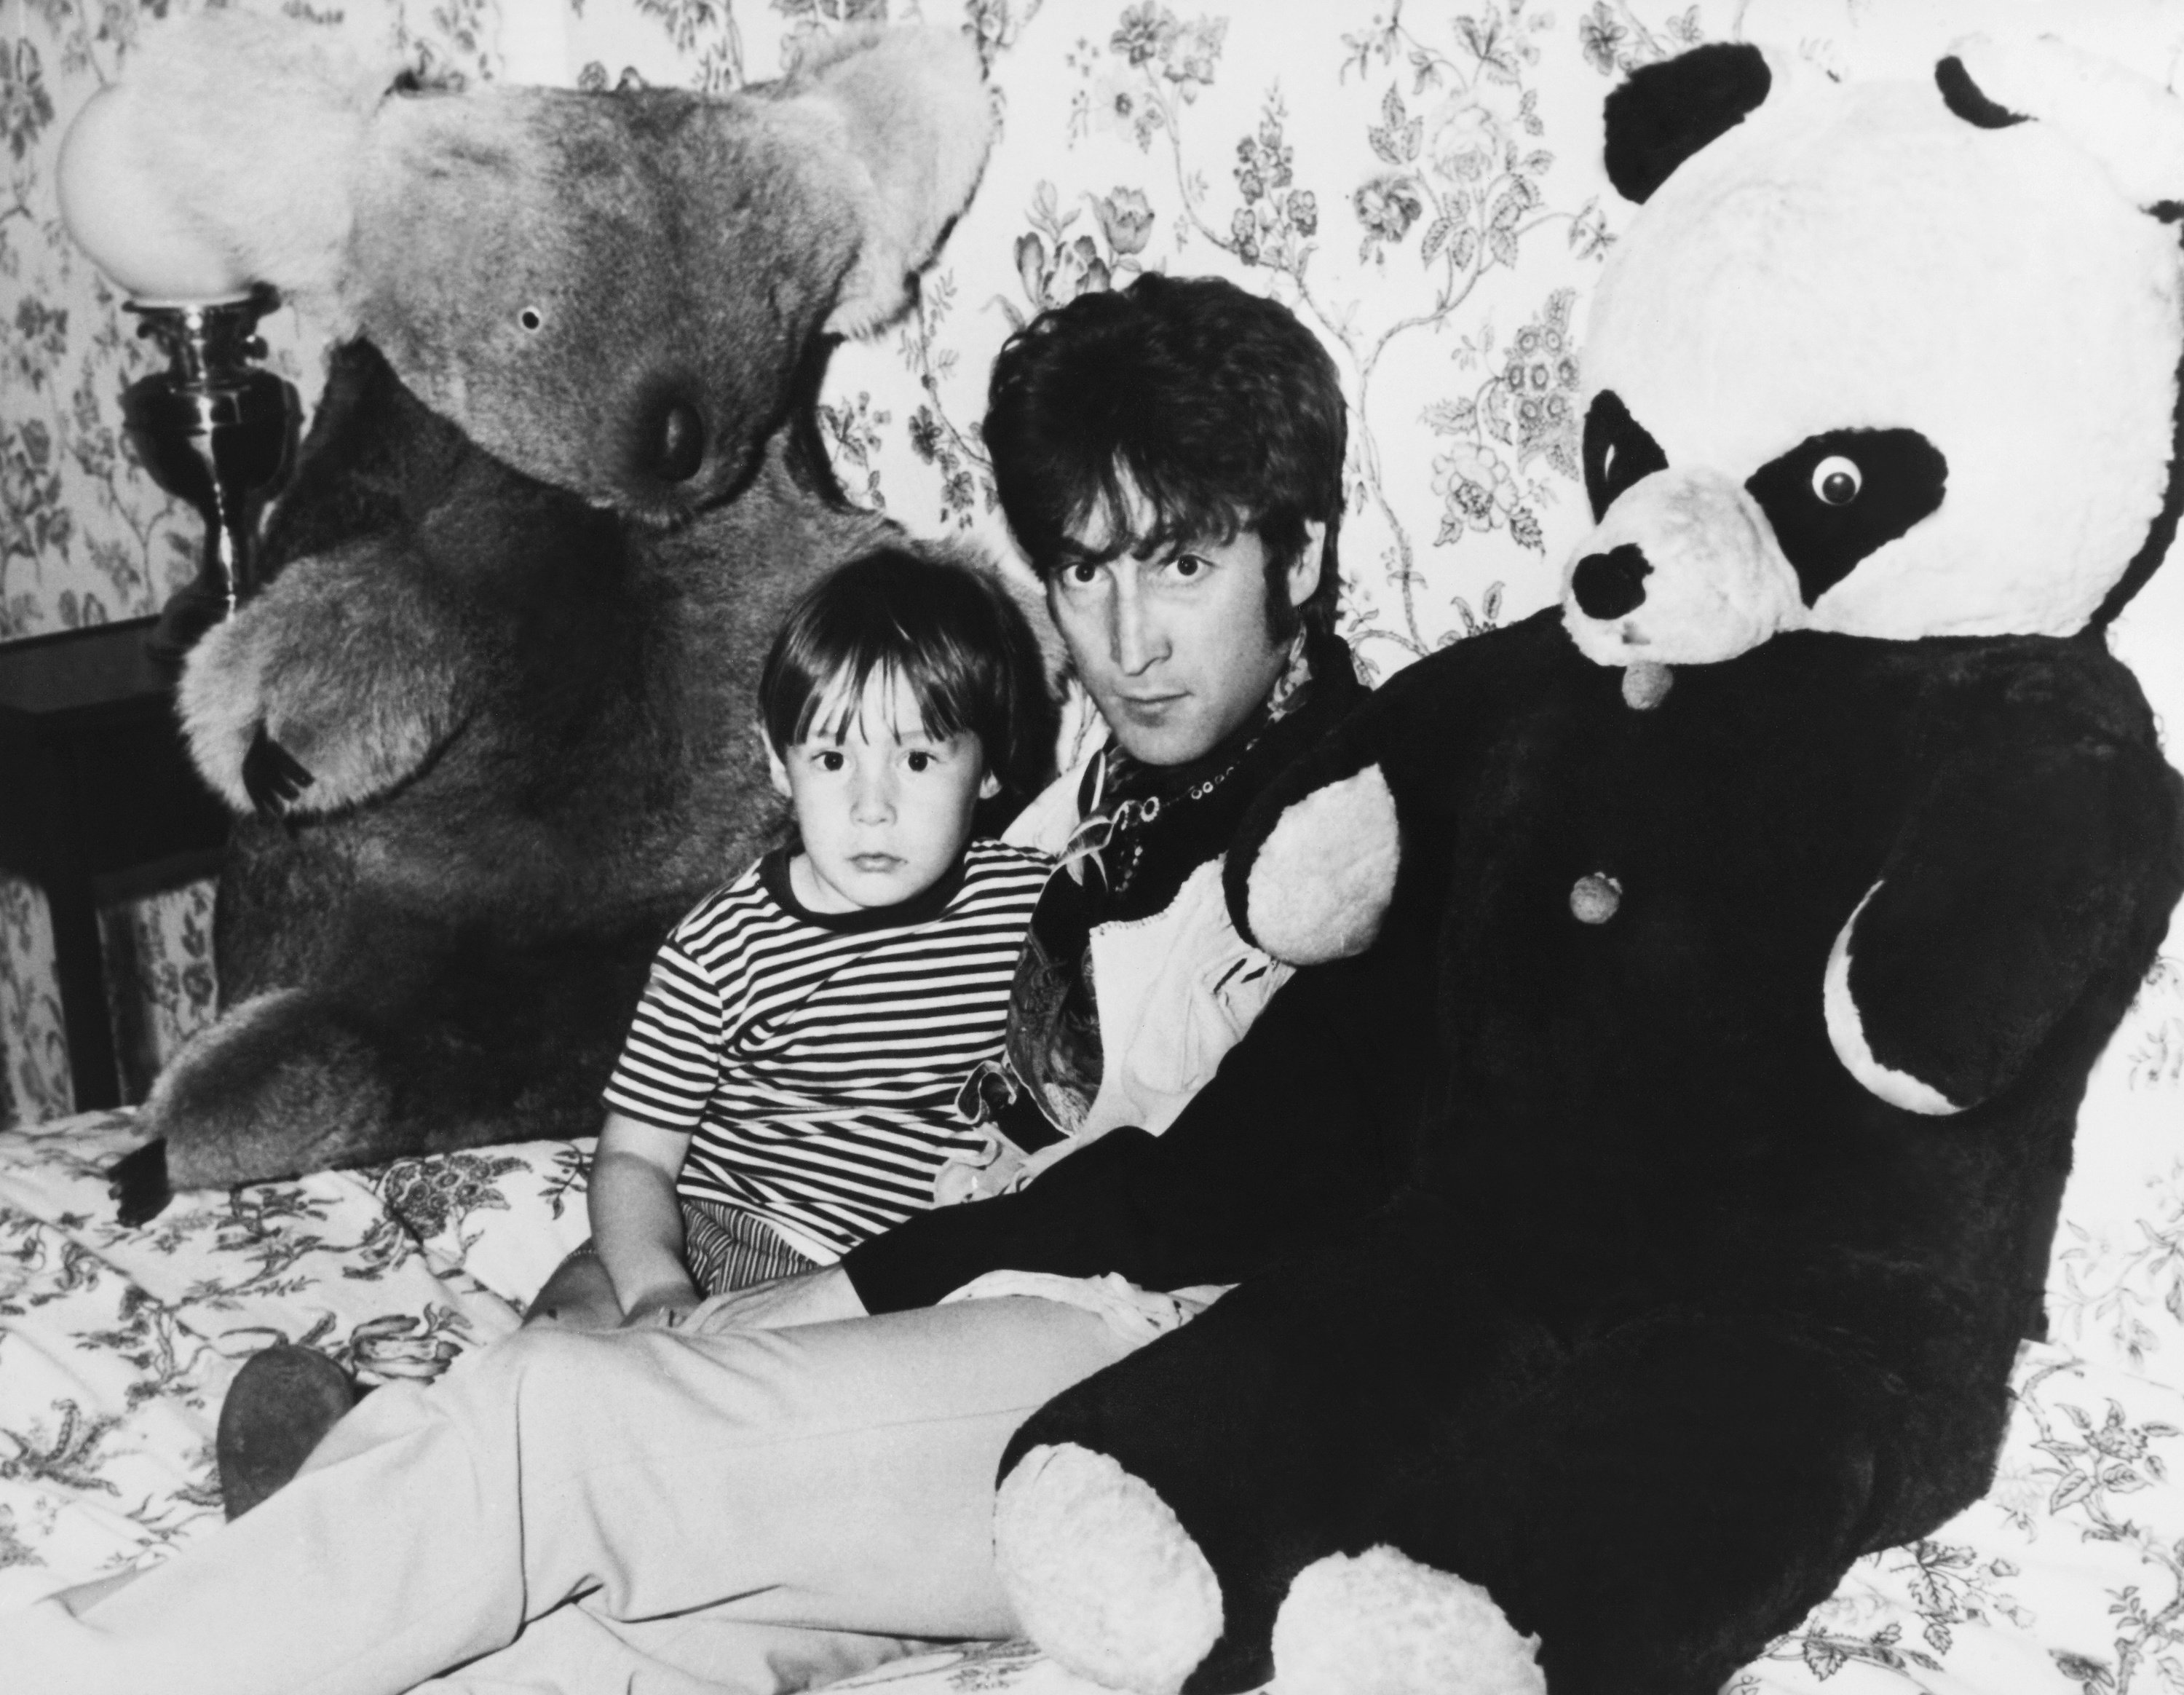 John Lennon Once Shouted at His 3-Year-Old Son for Eating Messily, According to Cynthia Lennon